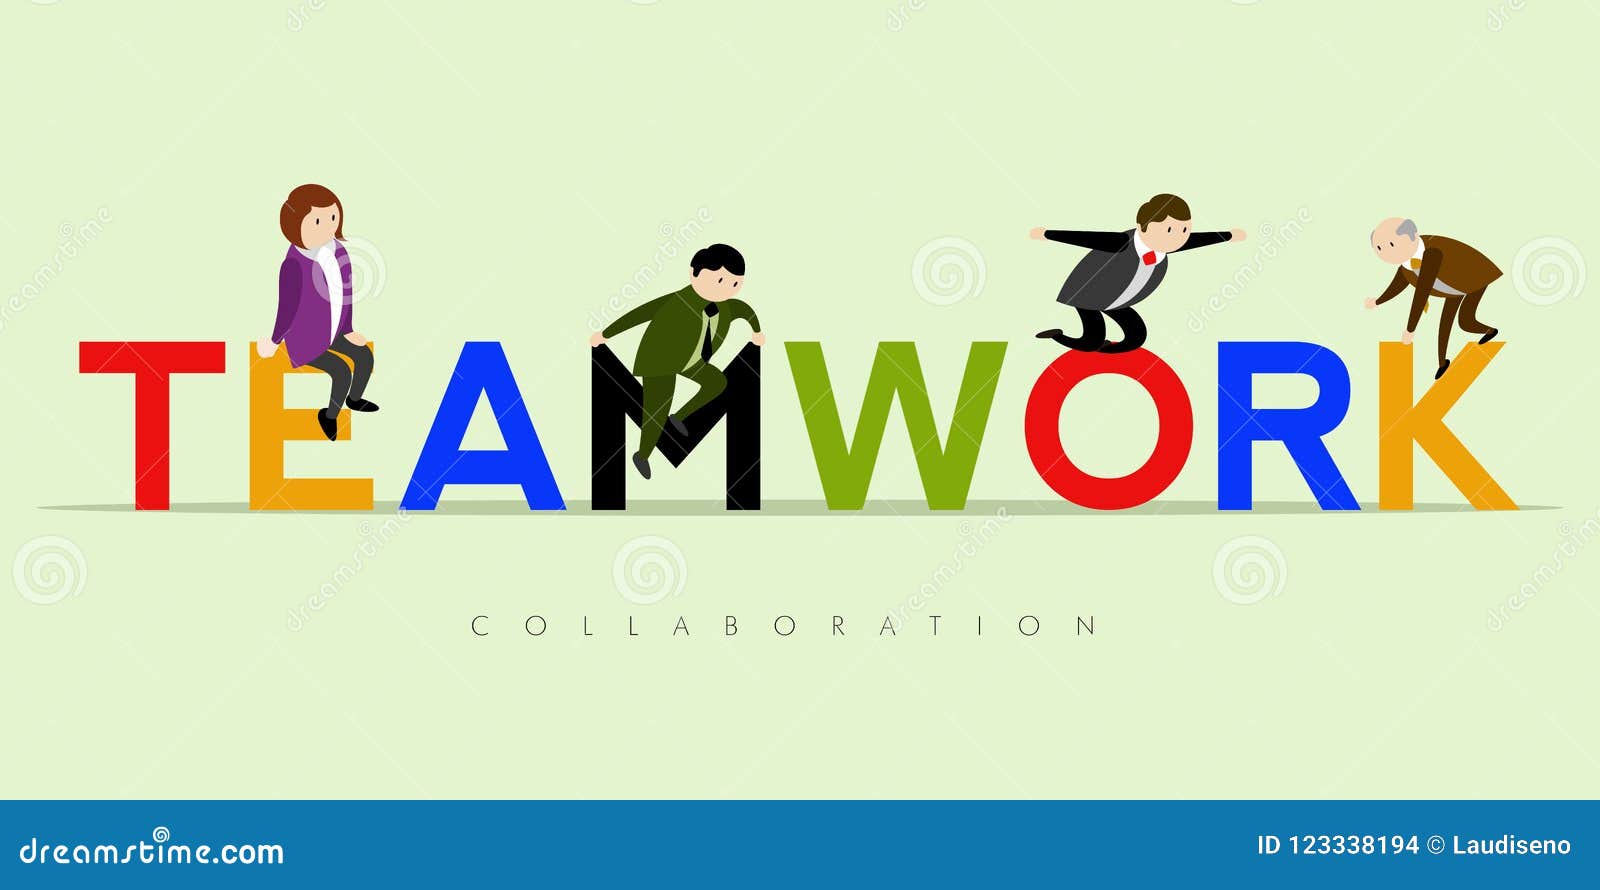 Abstract Teamwork Concept Image Stock Vector - Illustration of union ...